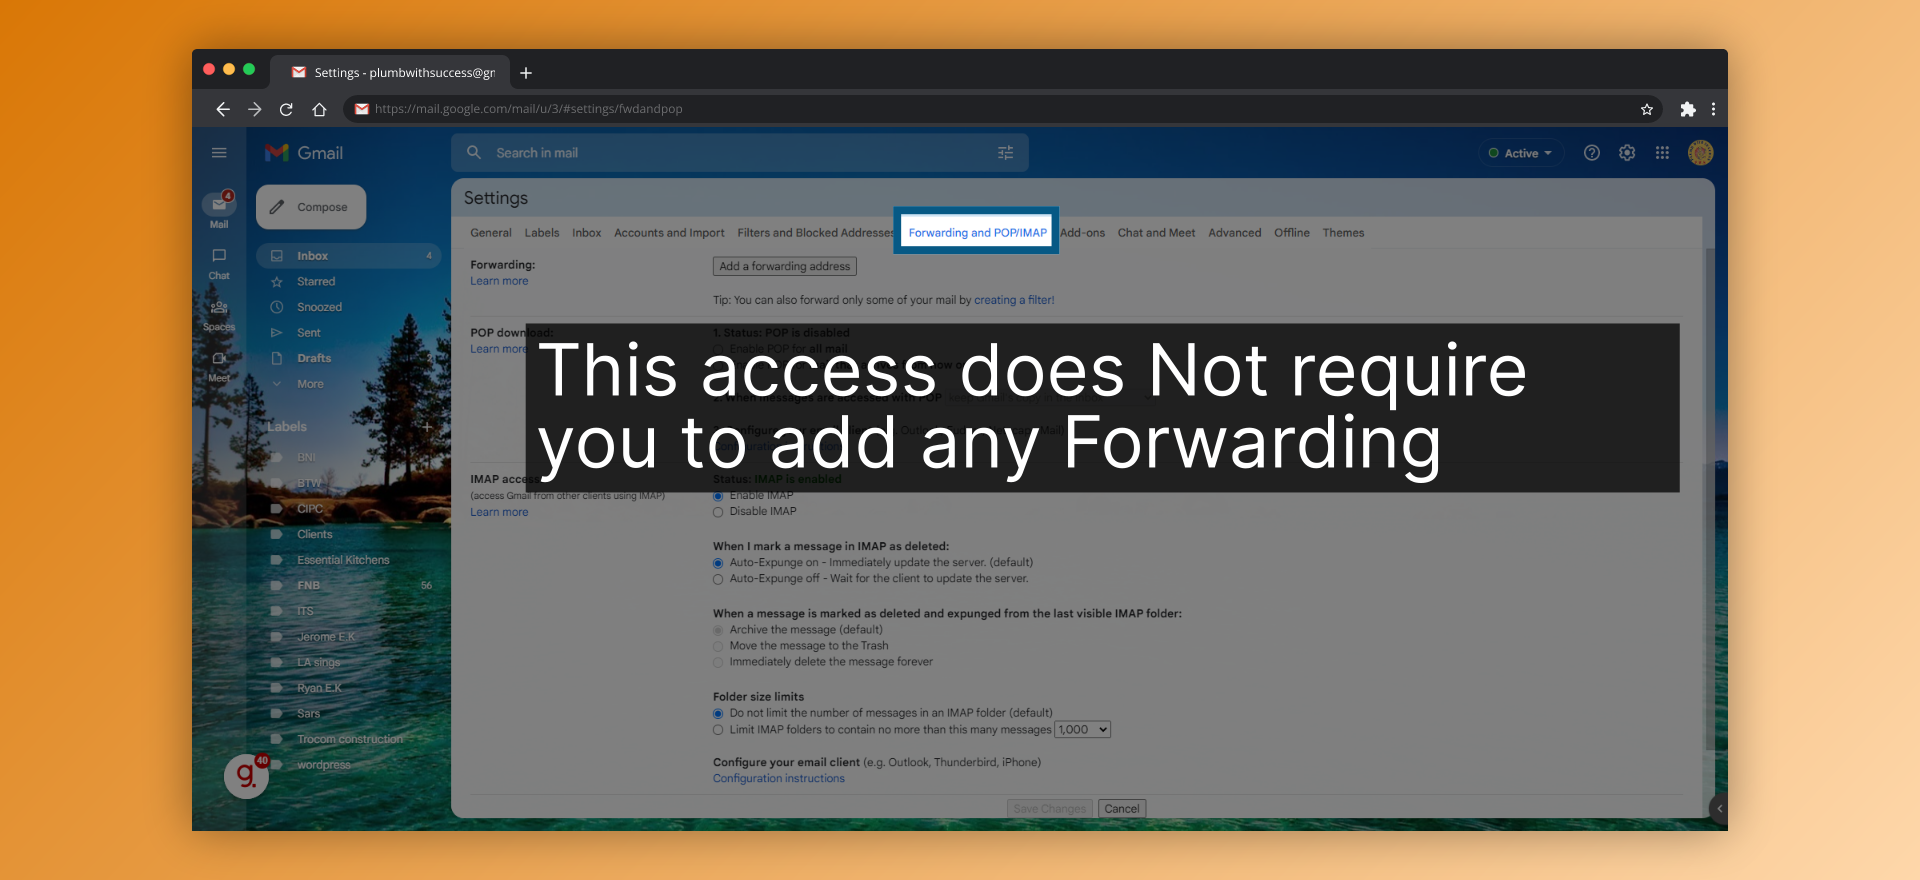 This access does Not require you to add any Forwarding address